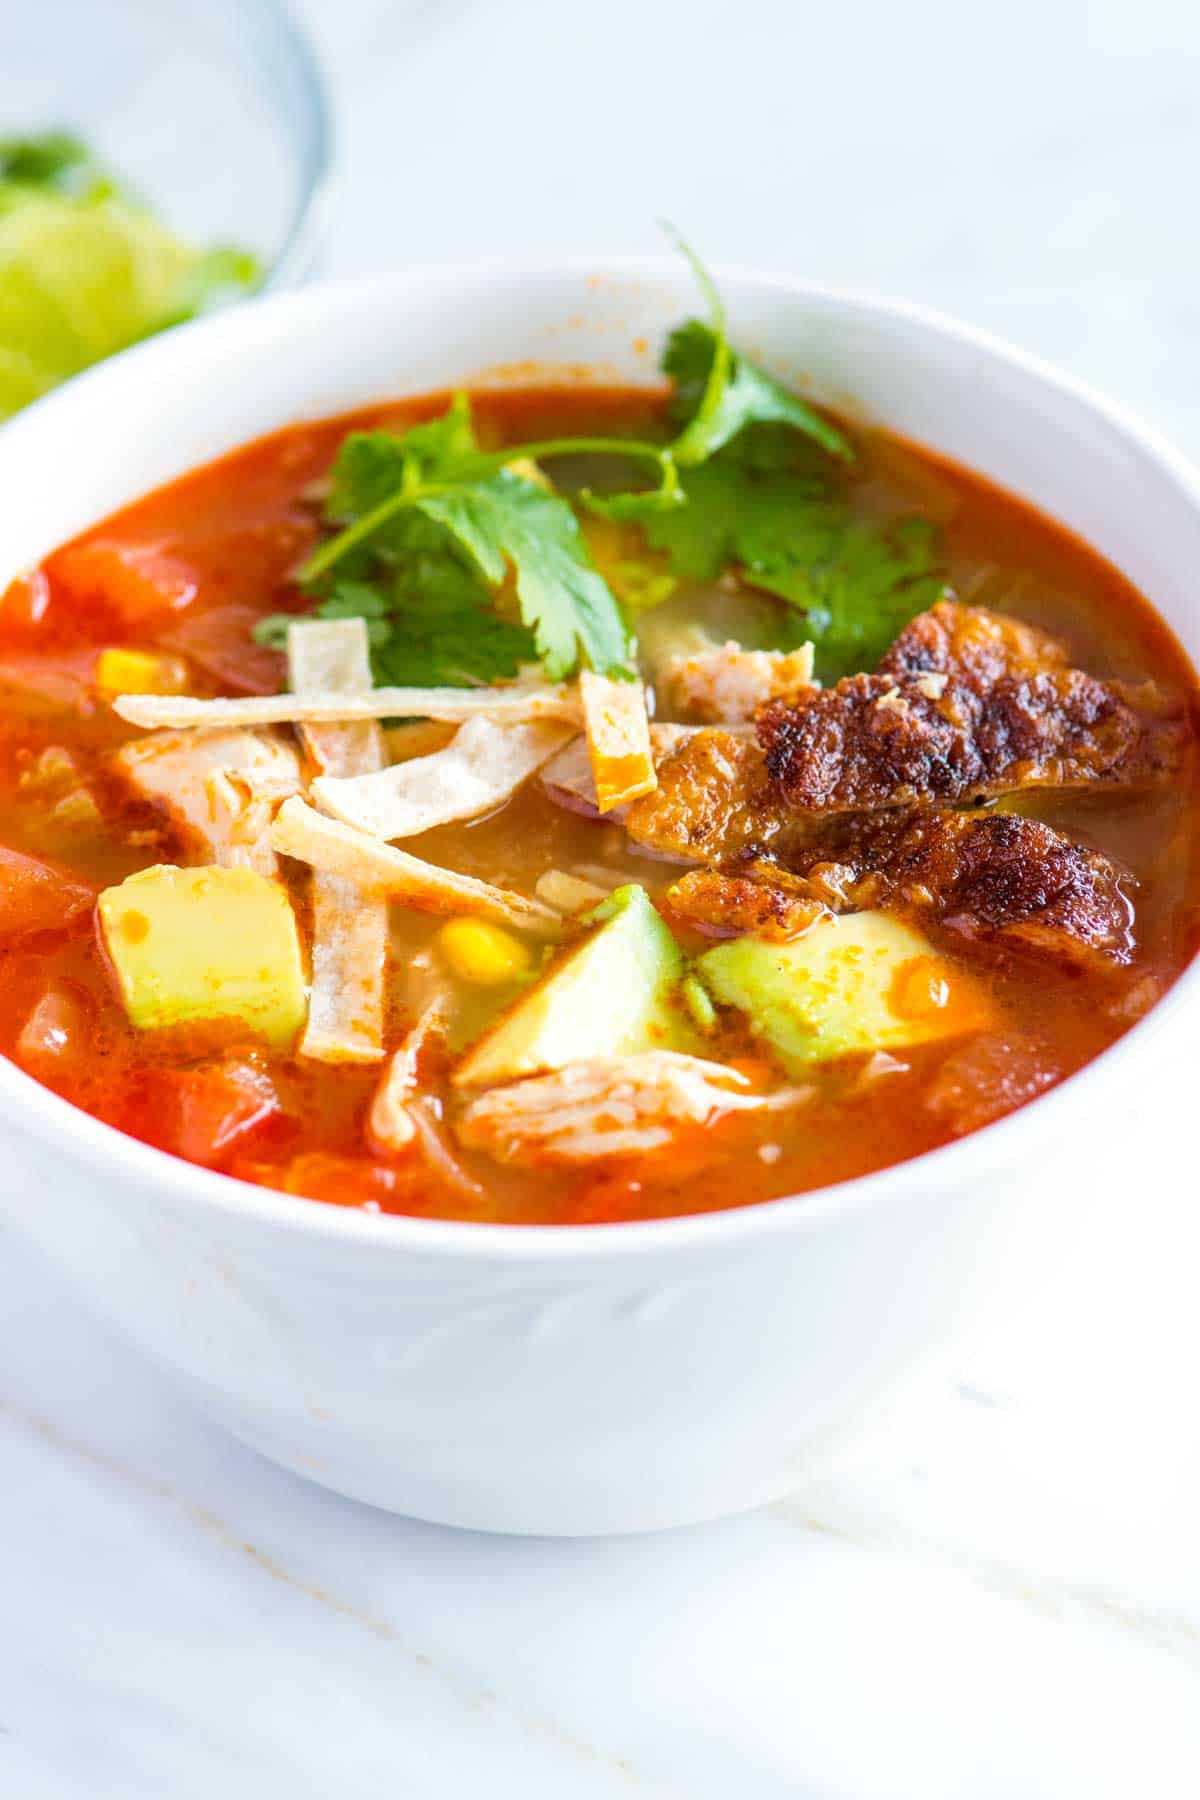 Easy Chicken Tortilla Soup from Scratch